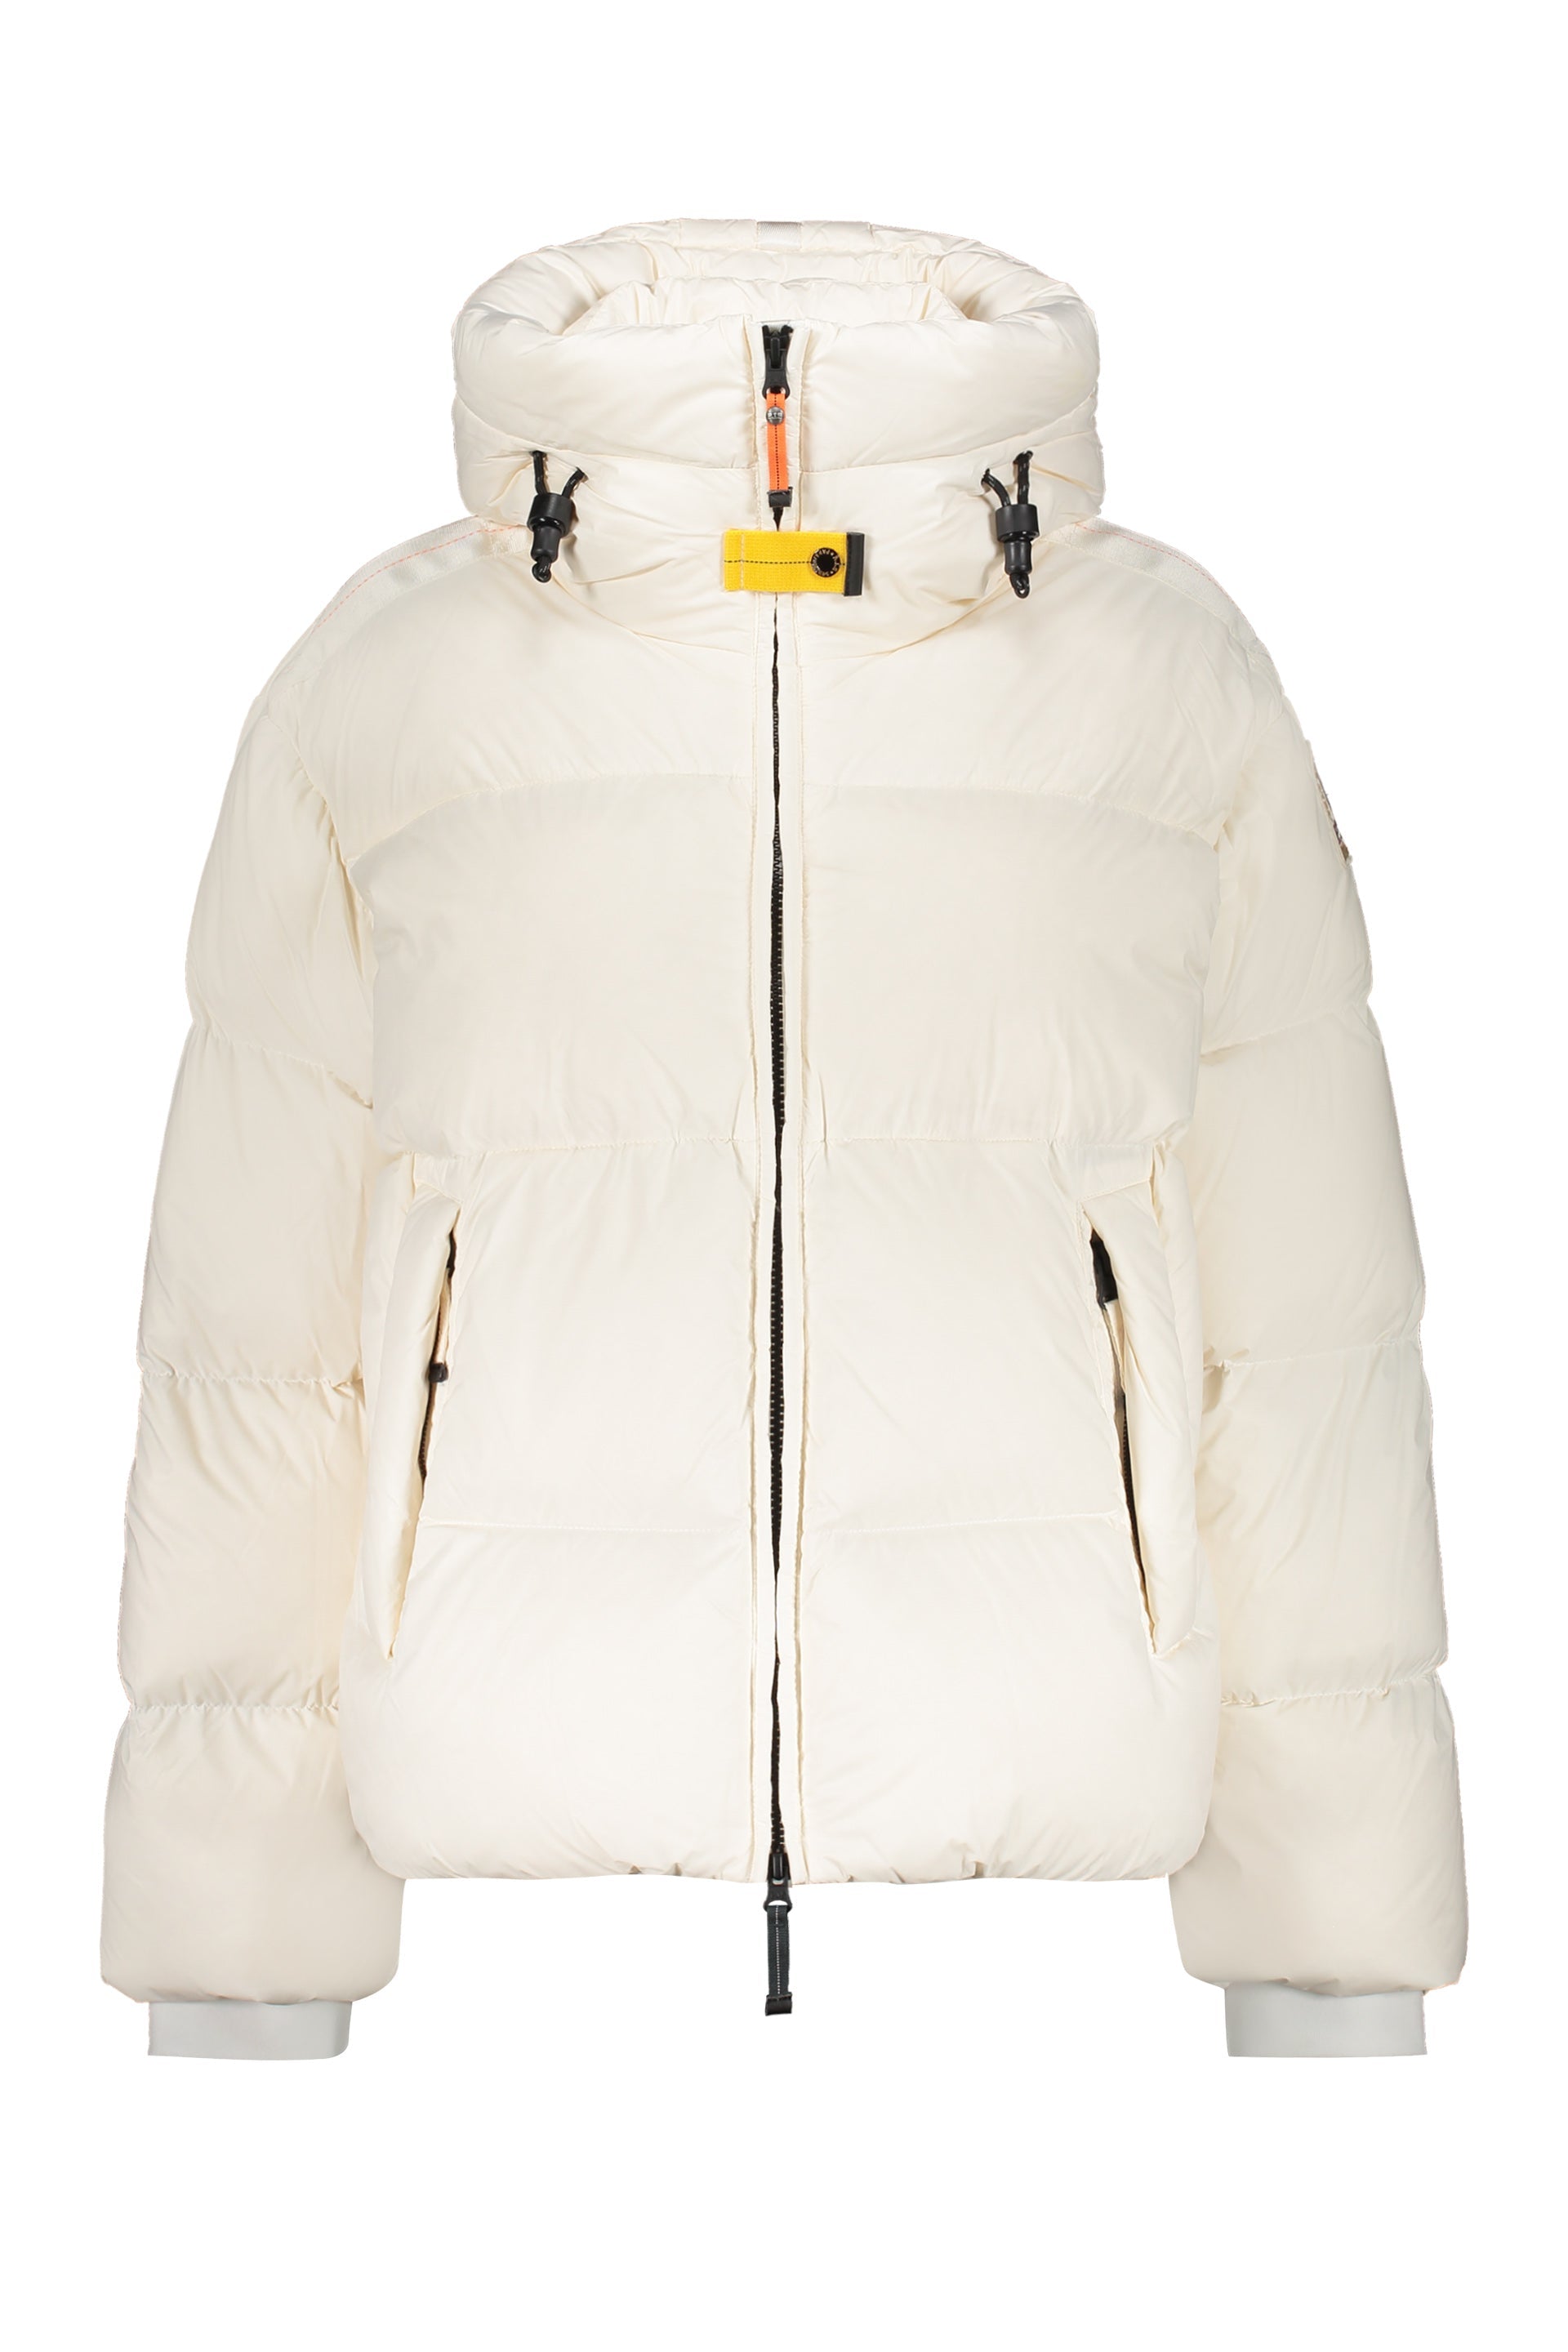 Parajumpers-OUTLET-SALE-Anya-hooded-down-jacket-Jacken-Mantel-L-ARCHIVE-COLLECTION.jpg